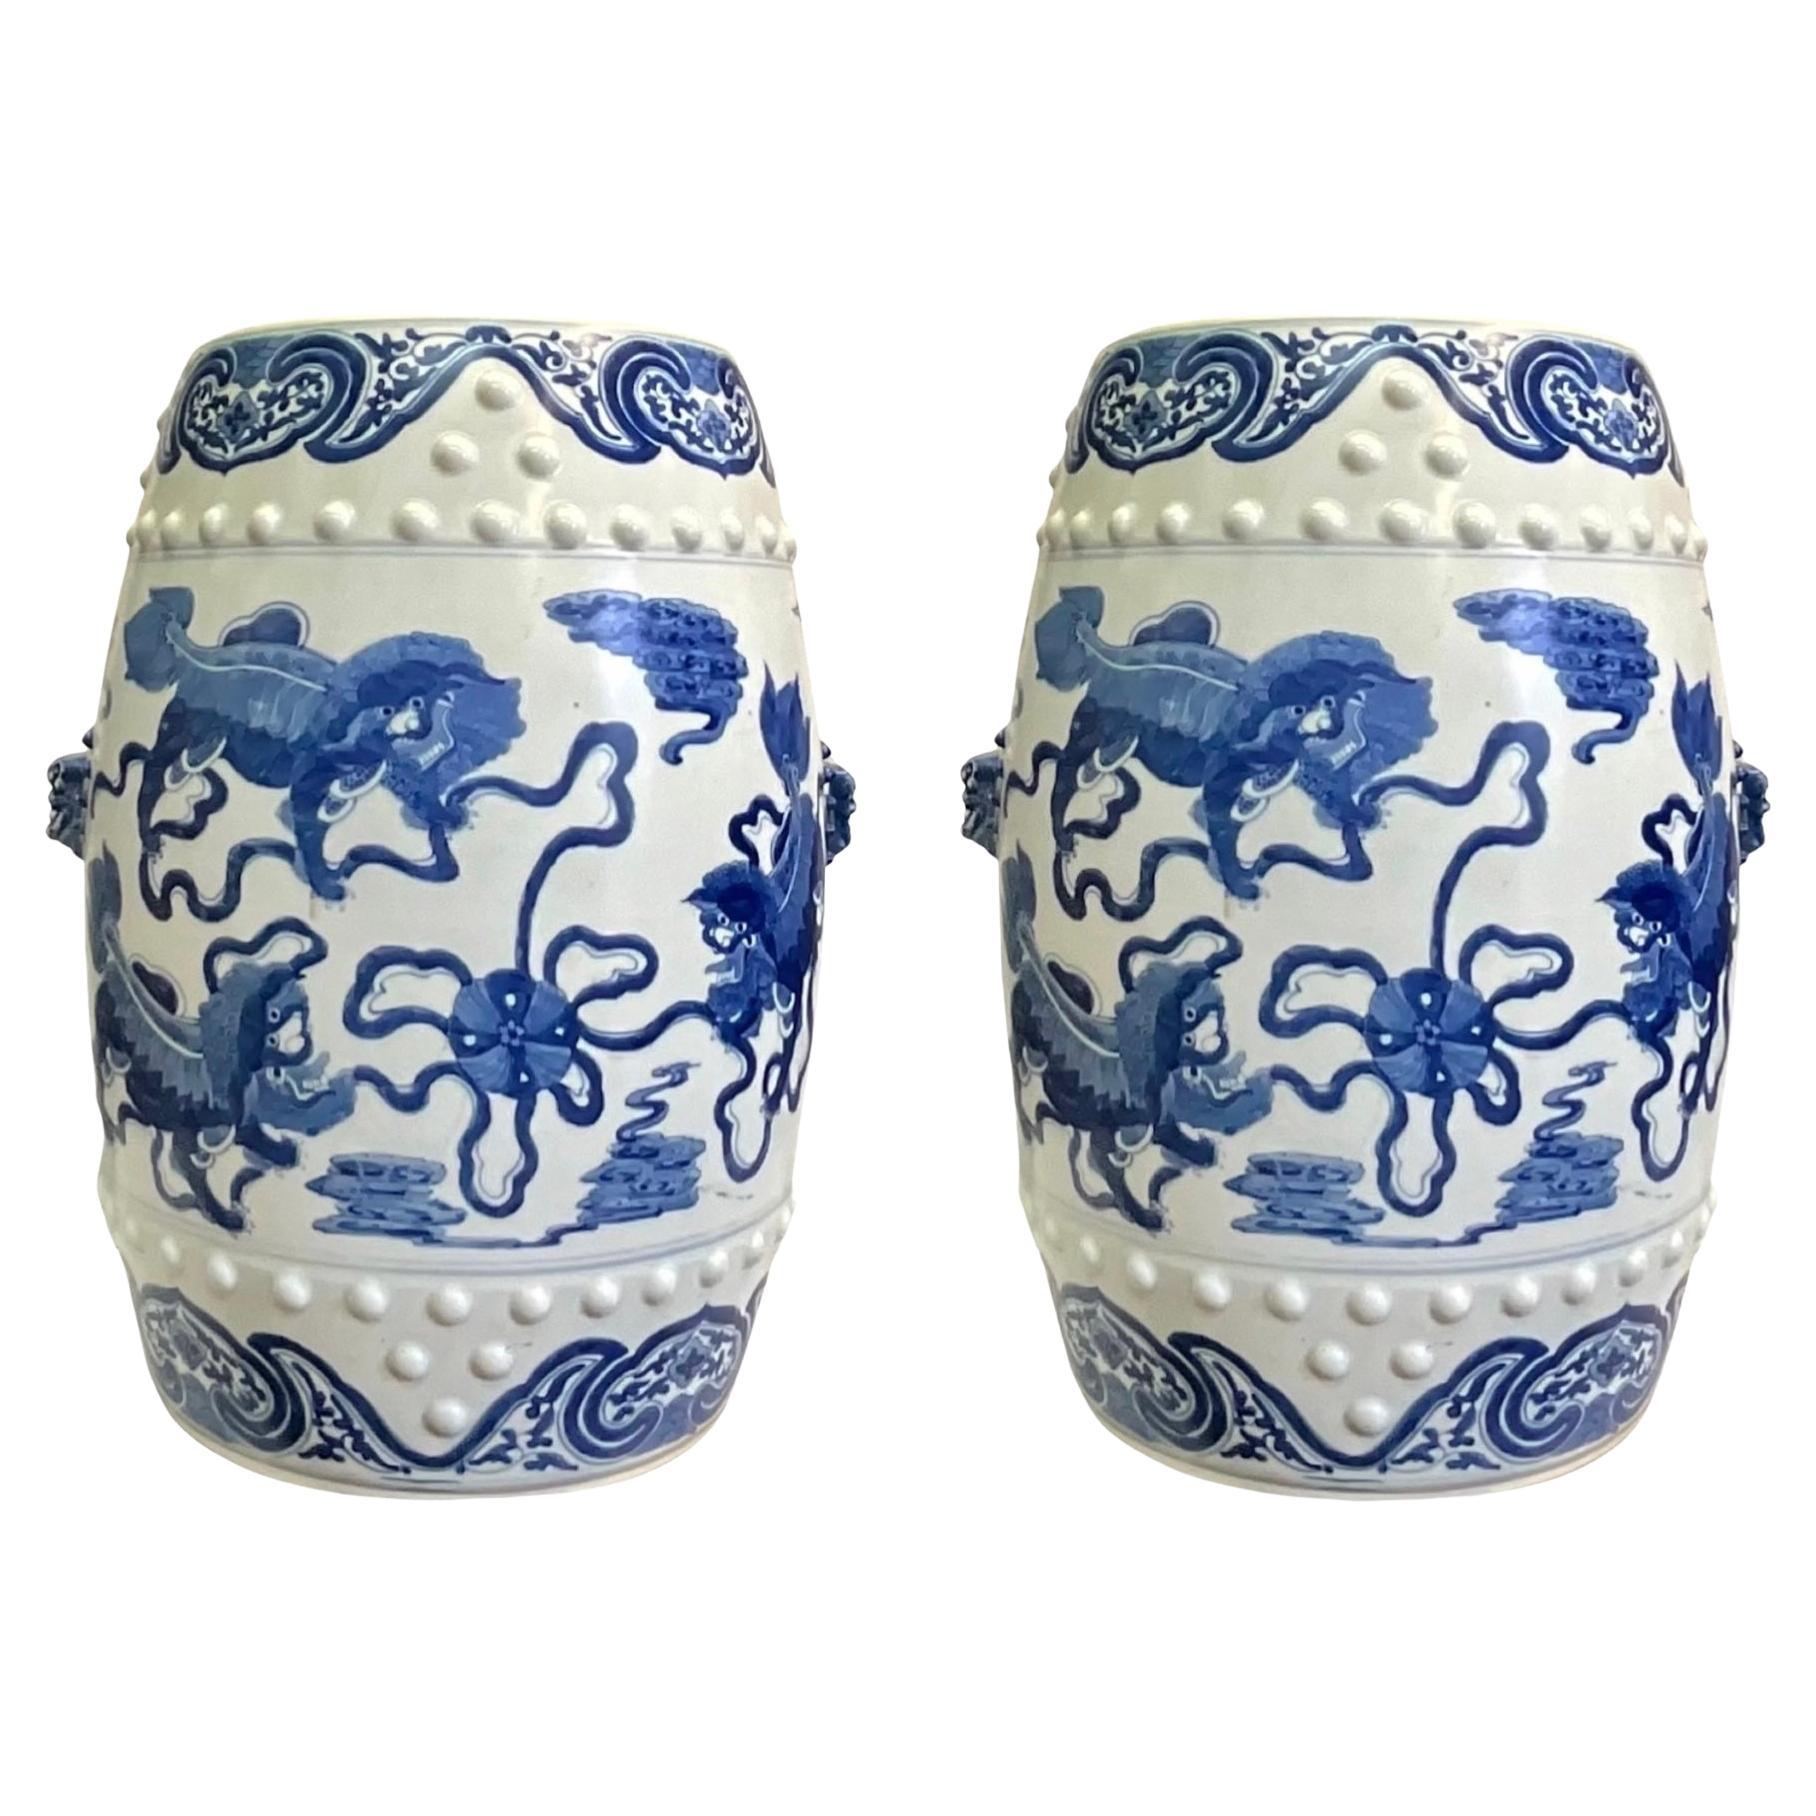 Chinese Export Style Blue and White Ceramic Foo Lion Garden Stools / Tables - 2 For Sale